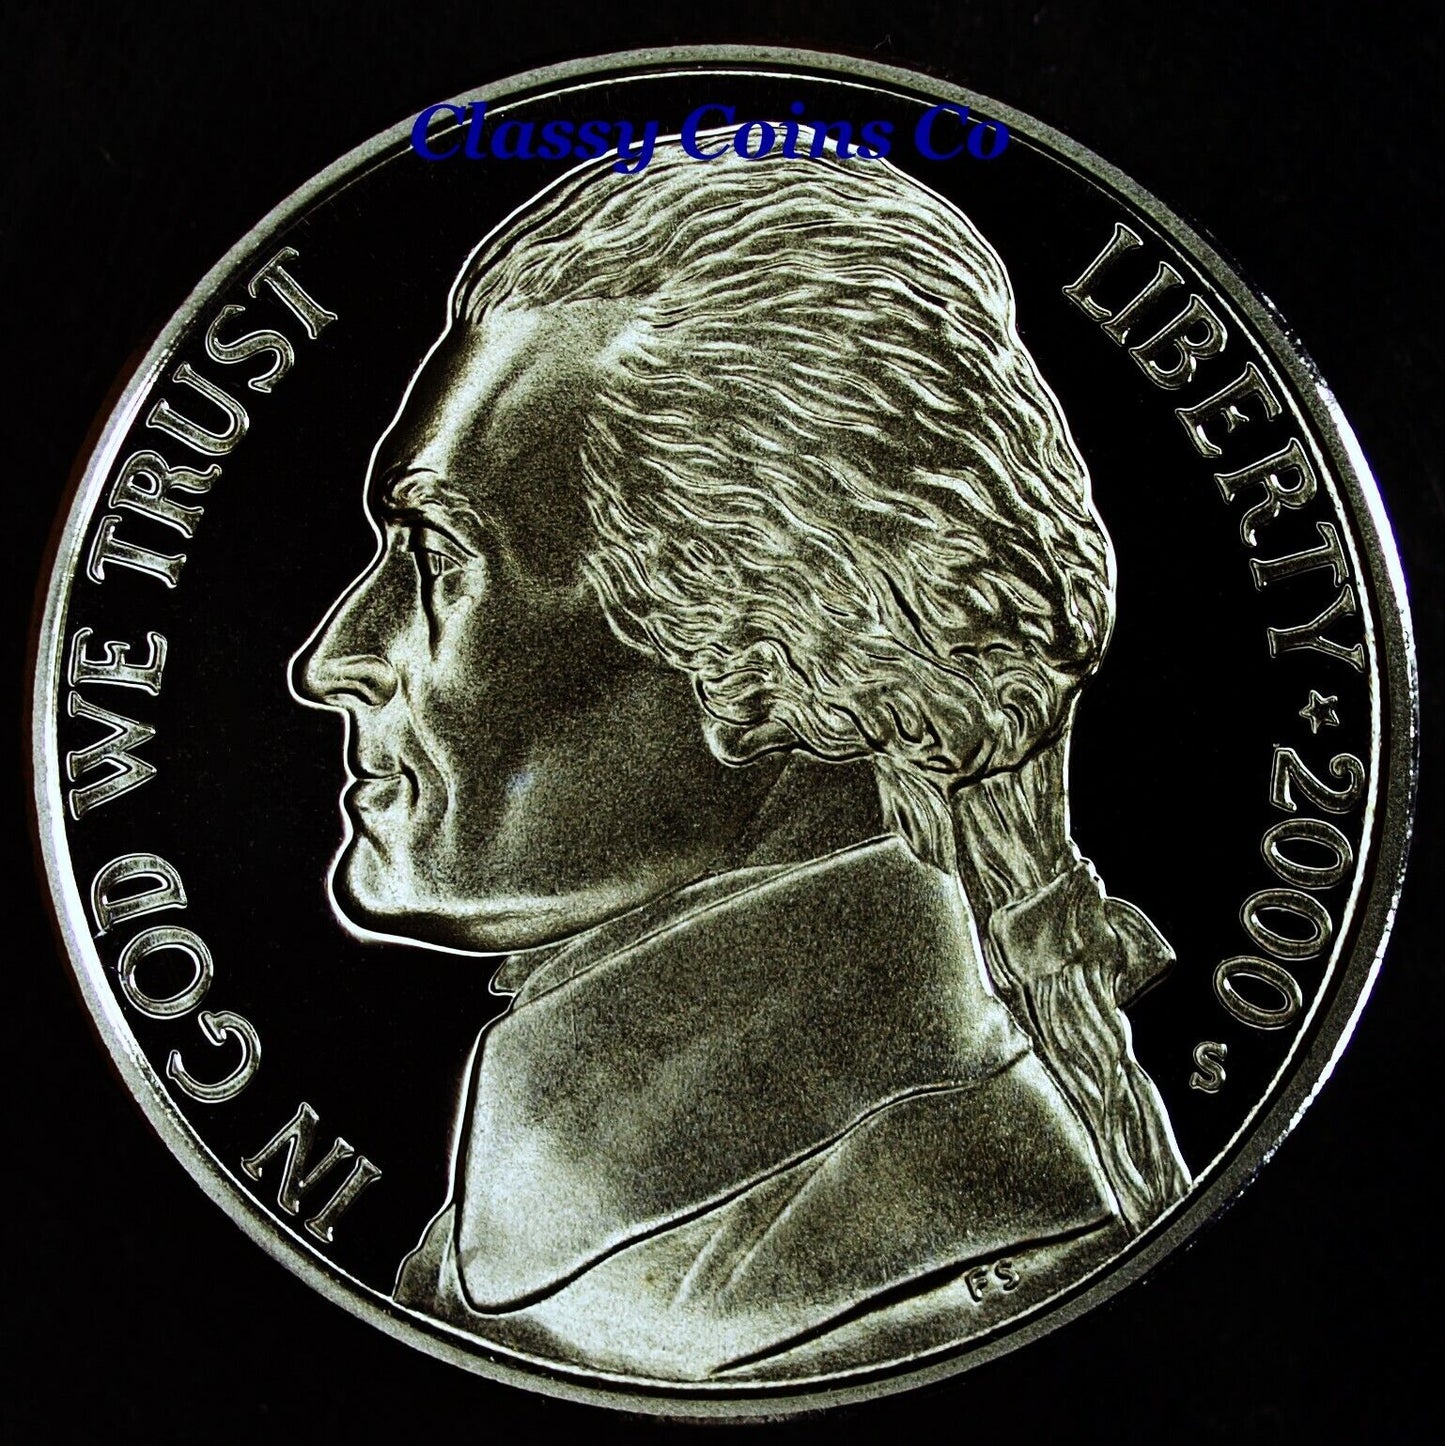 2000 S Proof Jefferson Nickel ☆☆ Great For Sets ☆☆ Fresh From Proof Set ☆☆